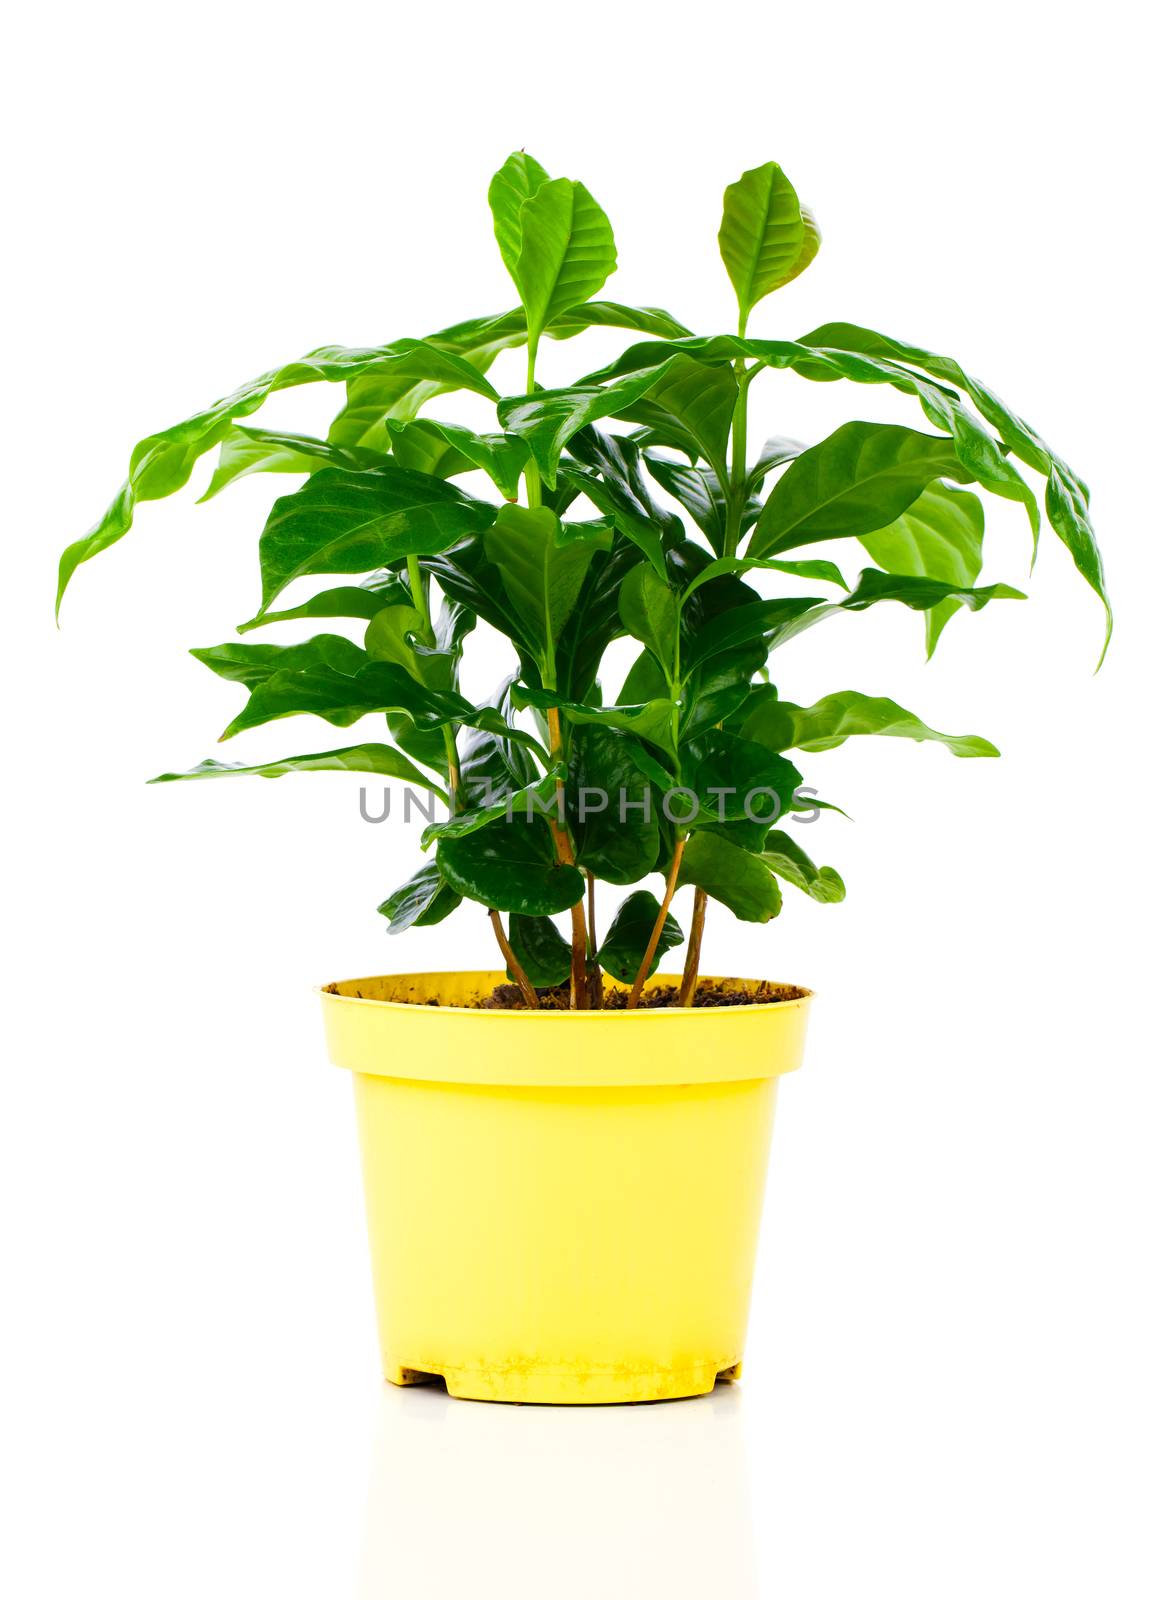 coffee plant tree on a white background by motorolka